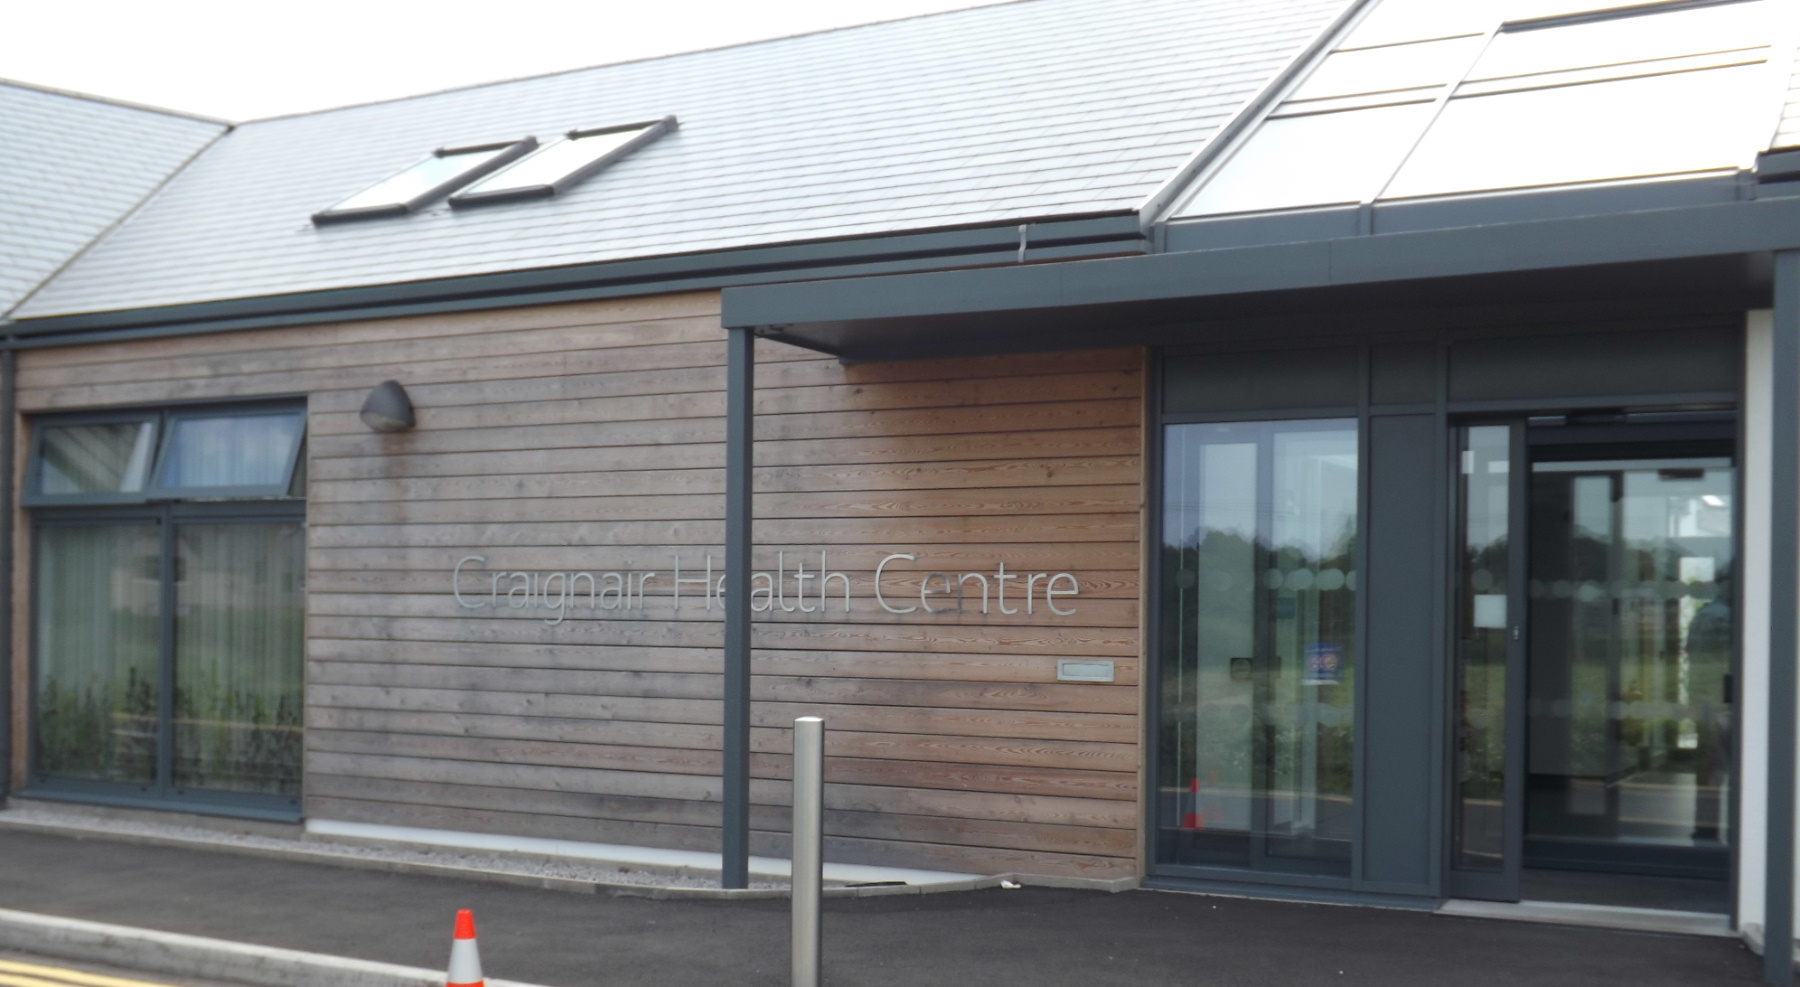 The front of the new Craignair Health Centre, Dalbeattie, Dumfries and Galloway